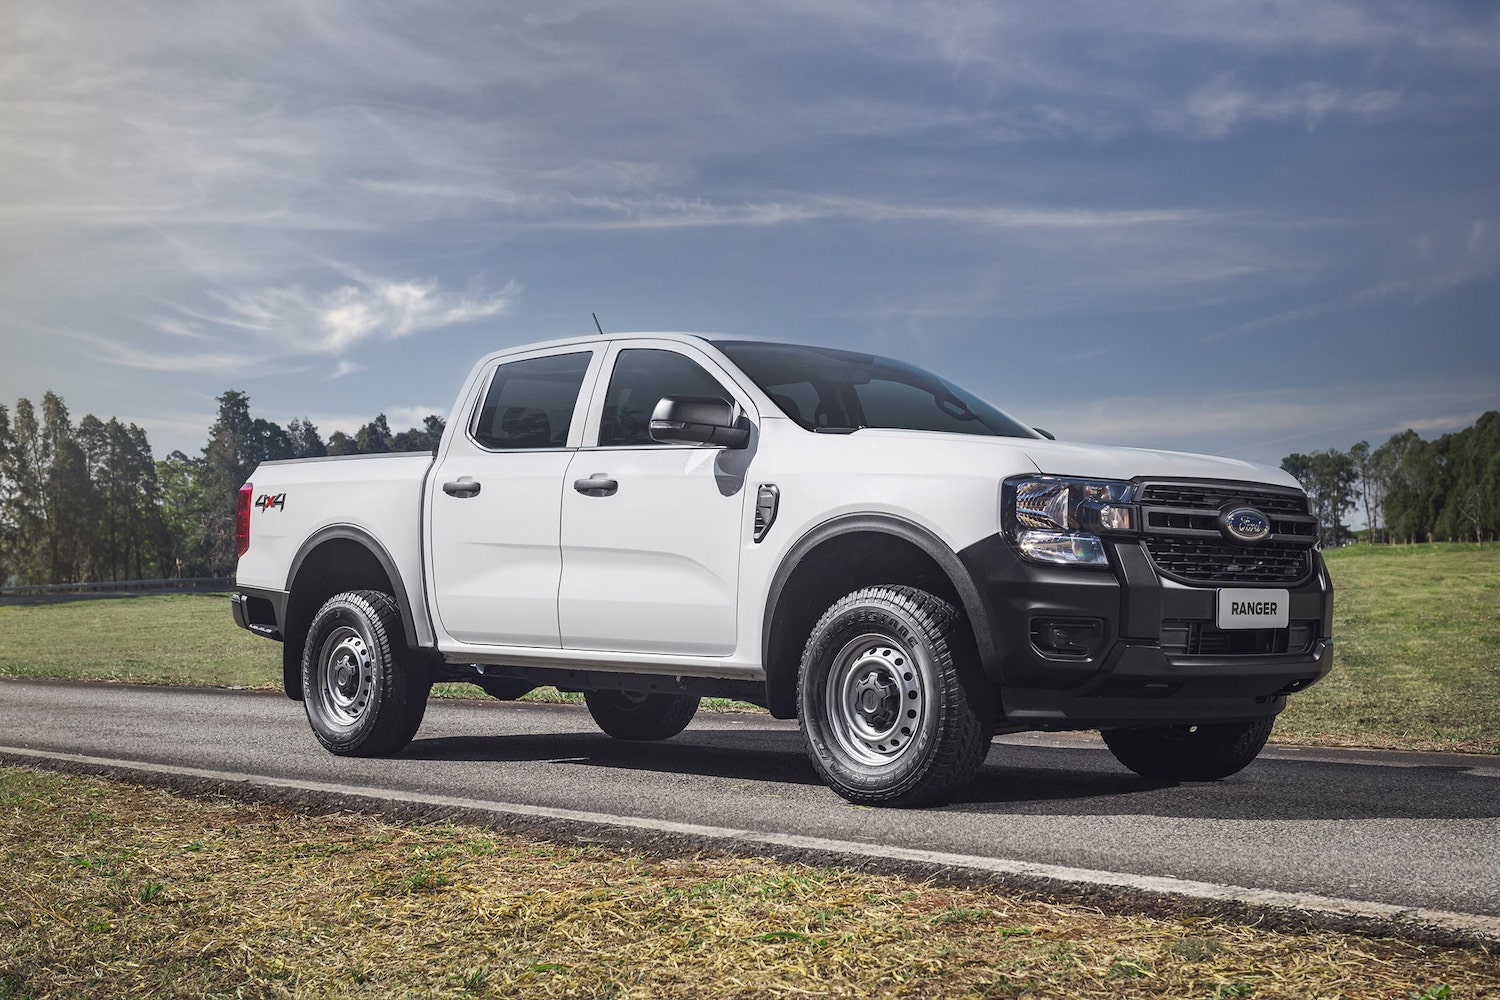 New Global Ford Ranger Pickup Previews The Next-Gen U.S. Model - Forbes  Wheels